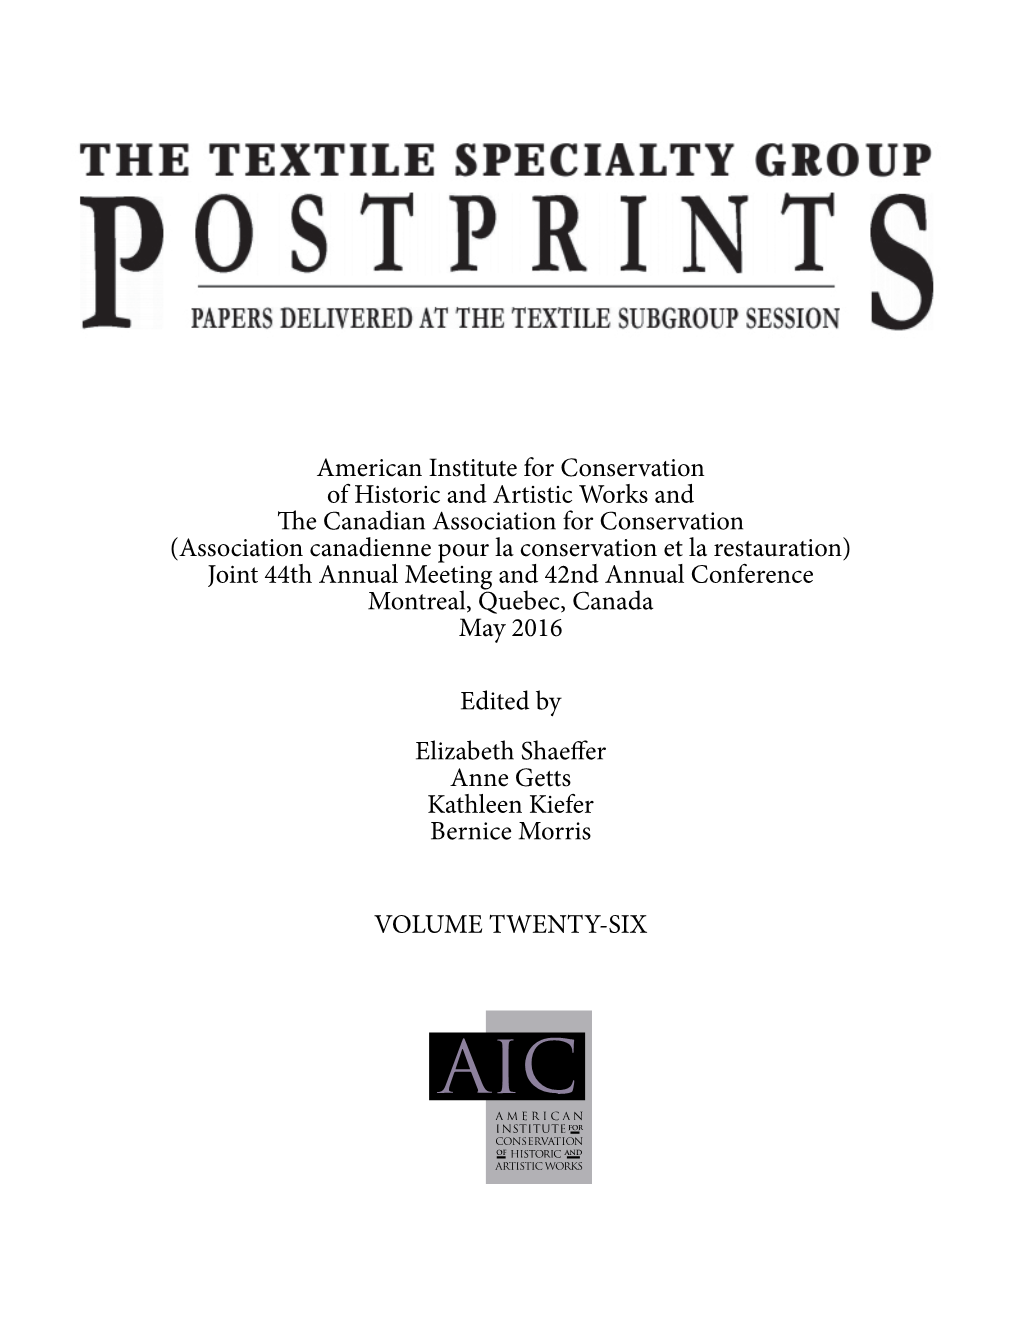 The Textile Specialty Group Postprints Papers Delivered at the Textile